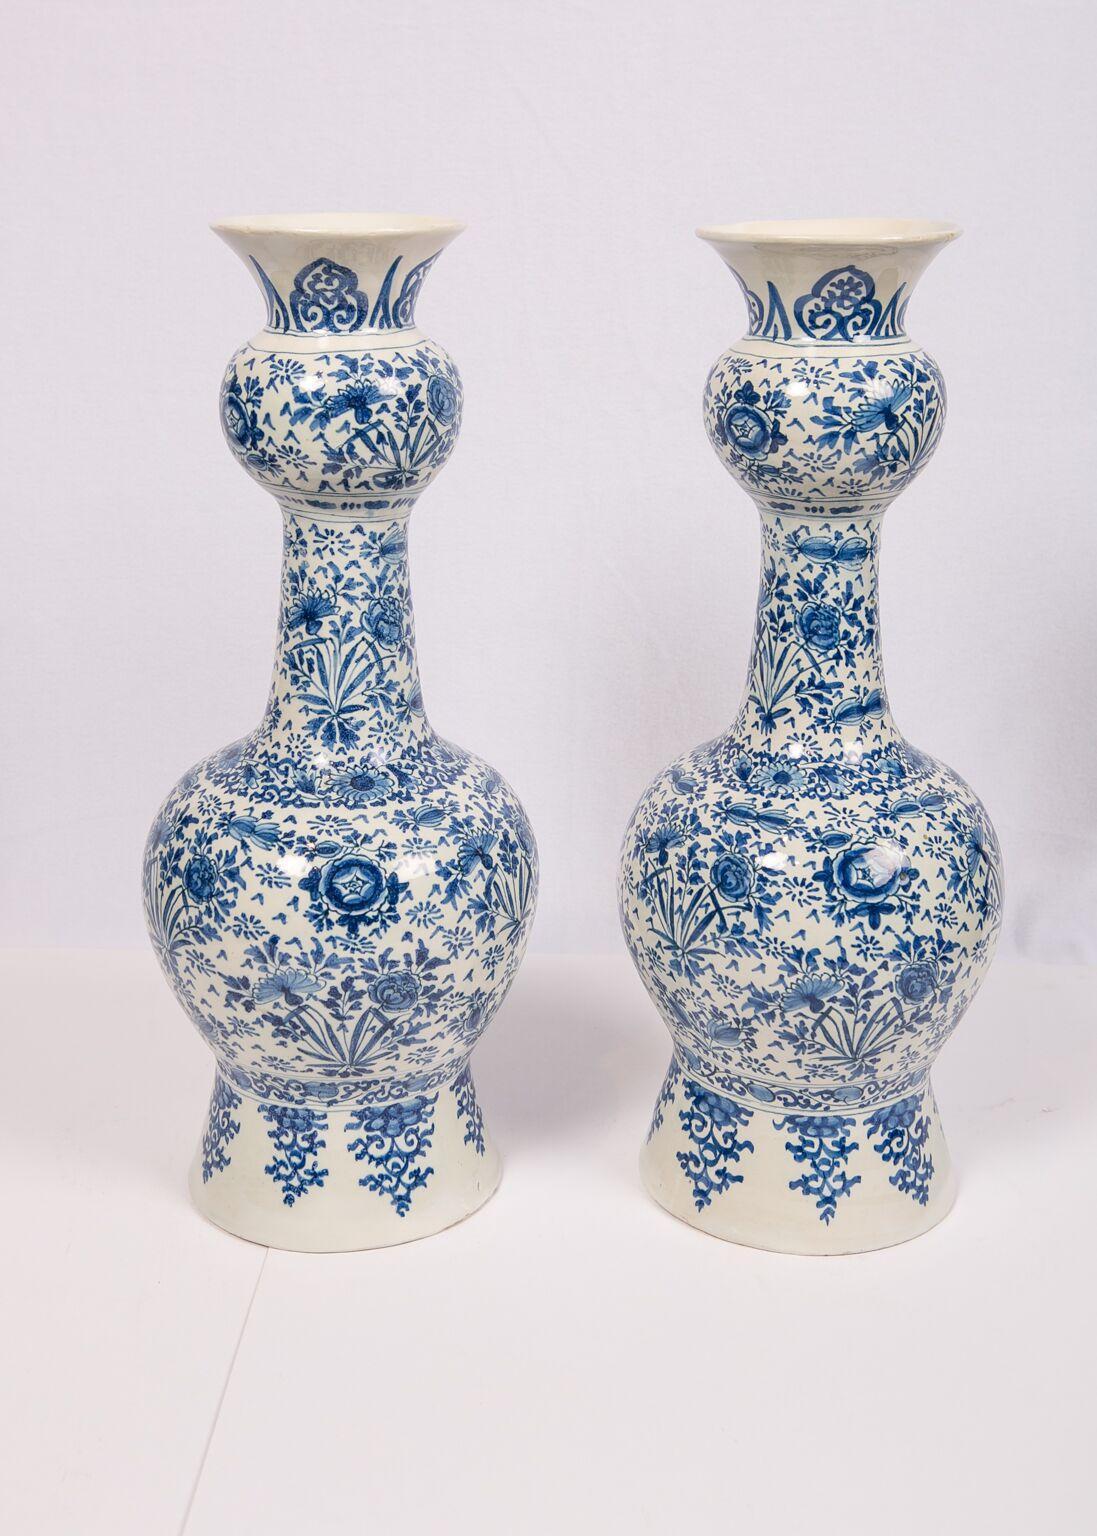 We are pleased to offer this beautiful group of 18th century blue and white Dutch delft hand painted vases for your home. At the back of the group is a beautiful pair of tall gourd-shaped vases hand painted in the 